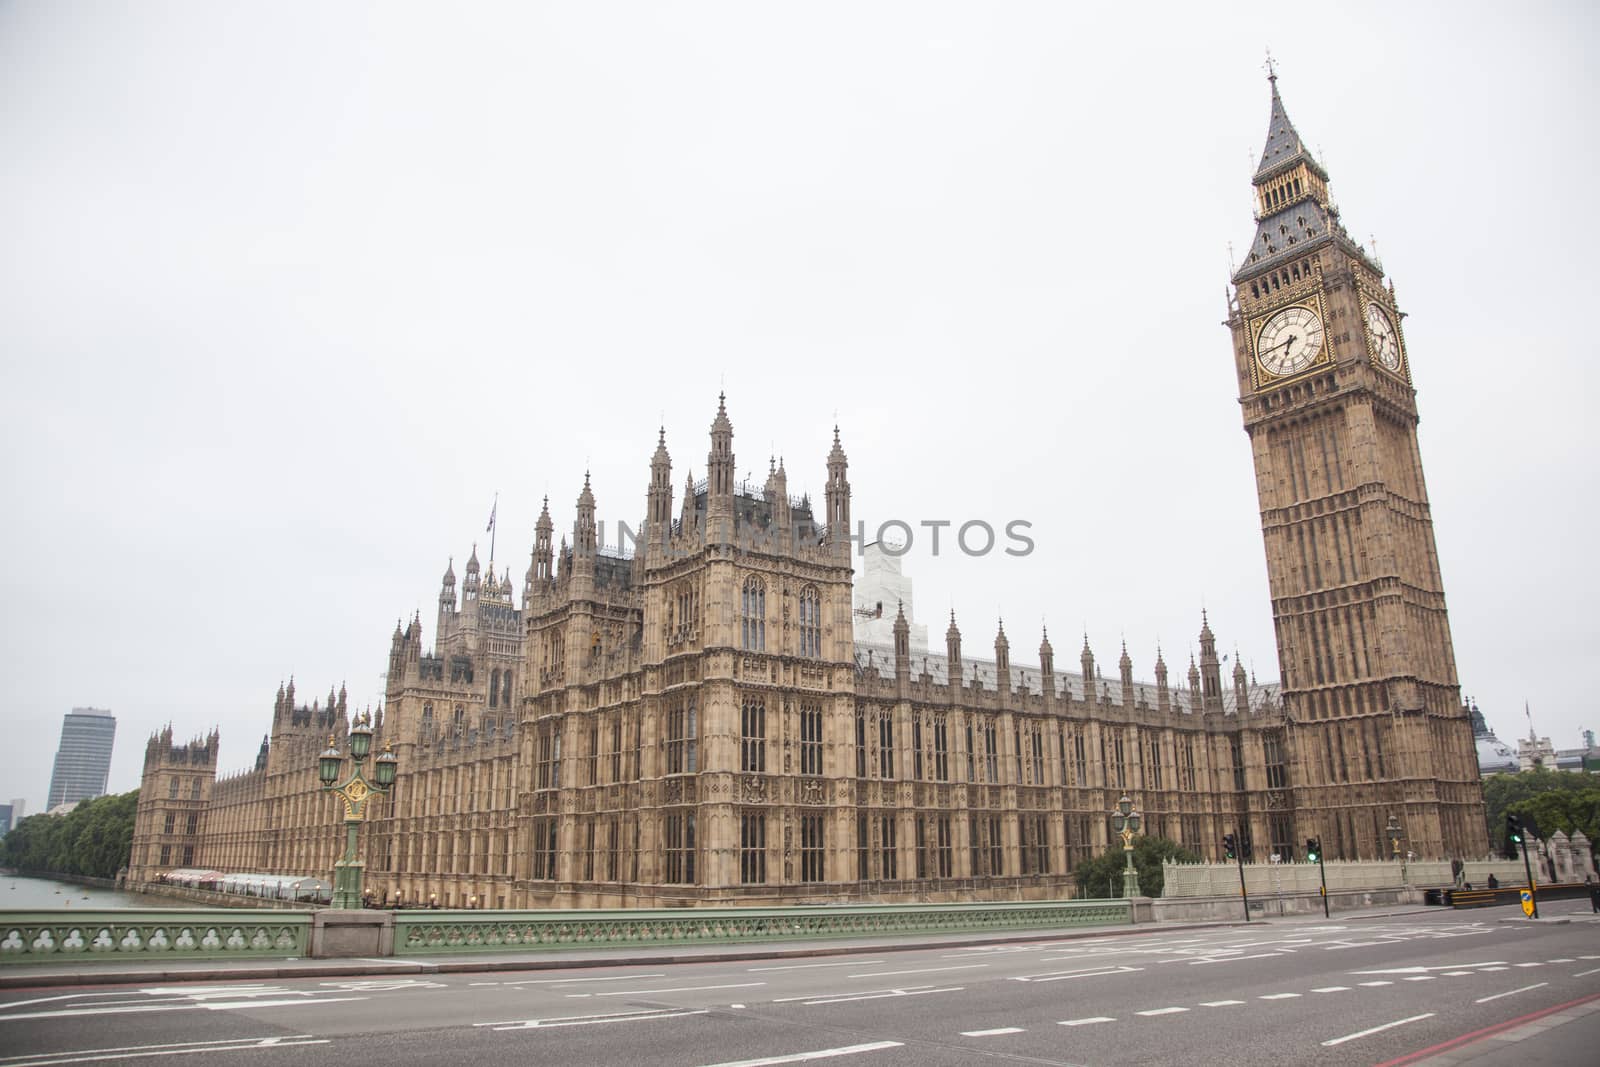 House of Parliament in London.